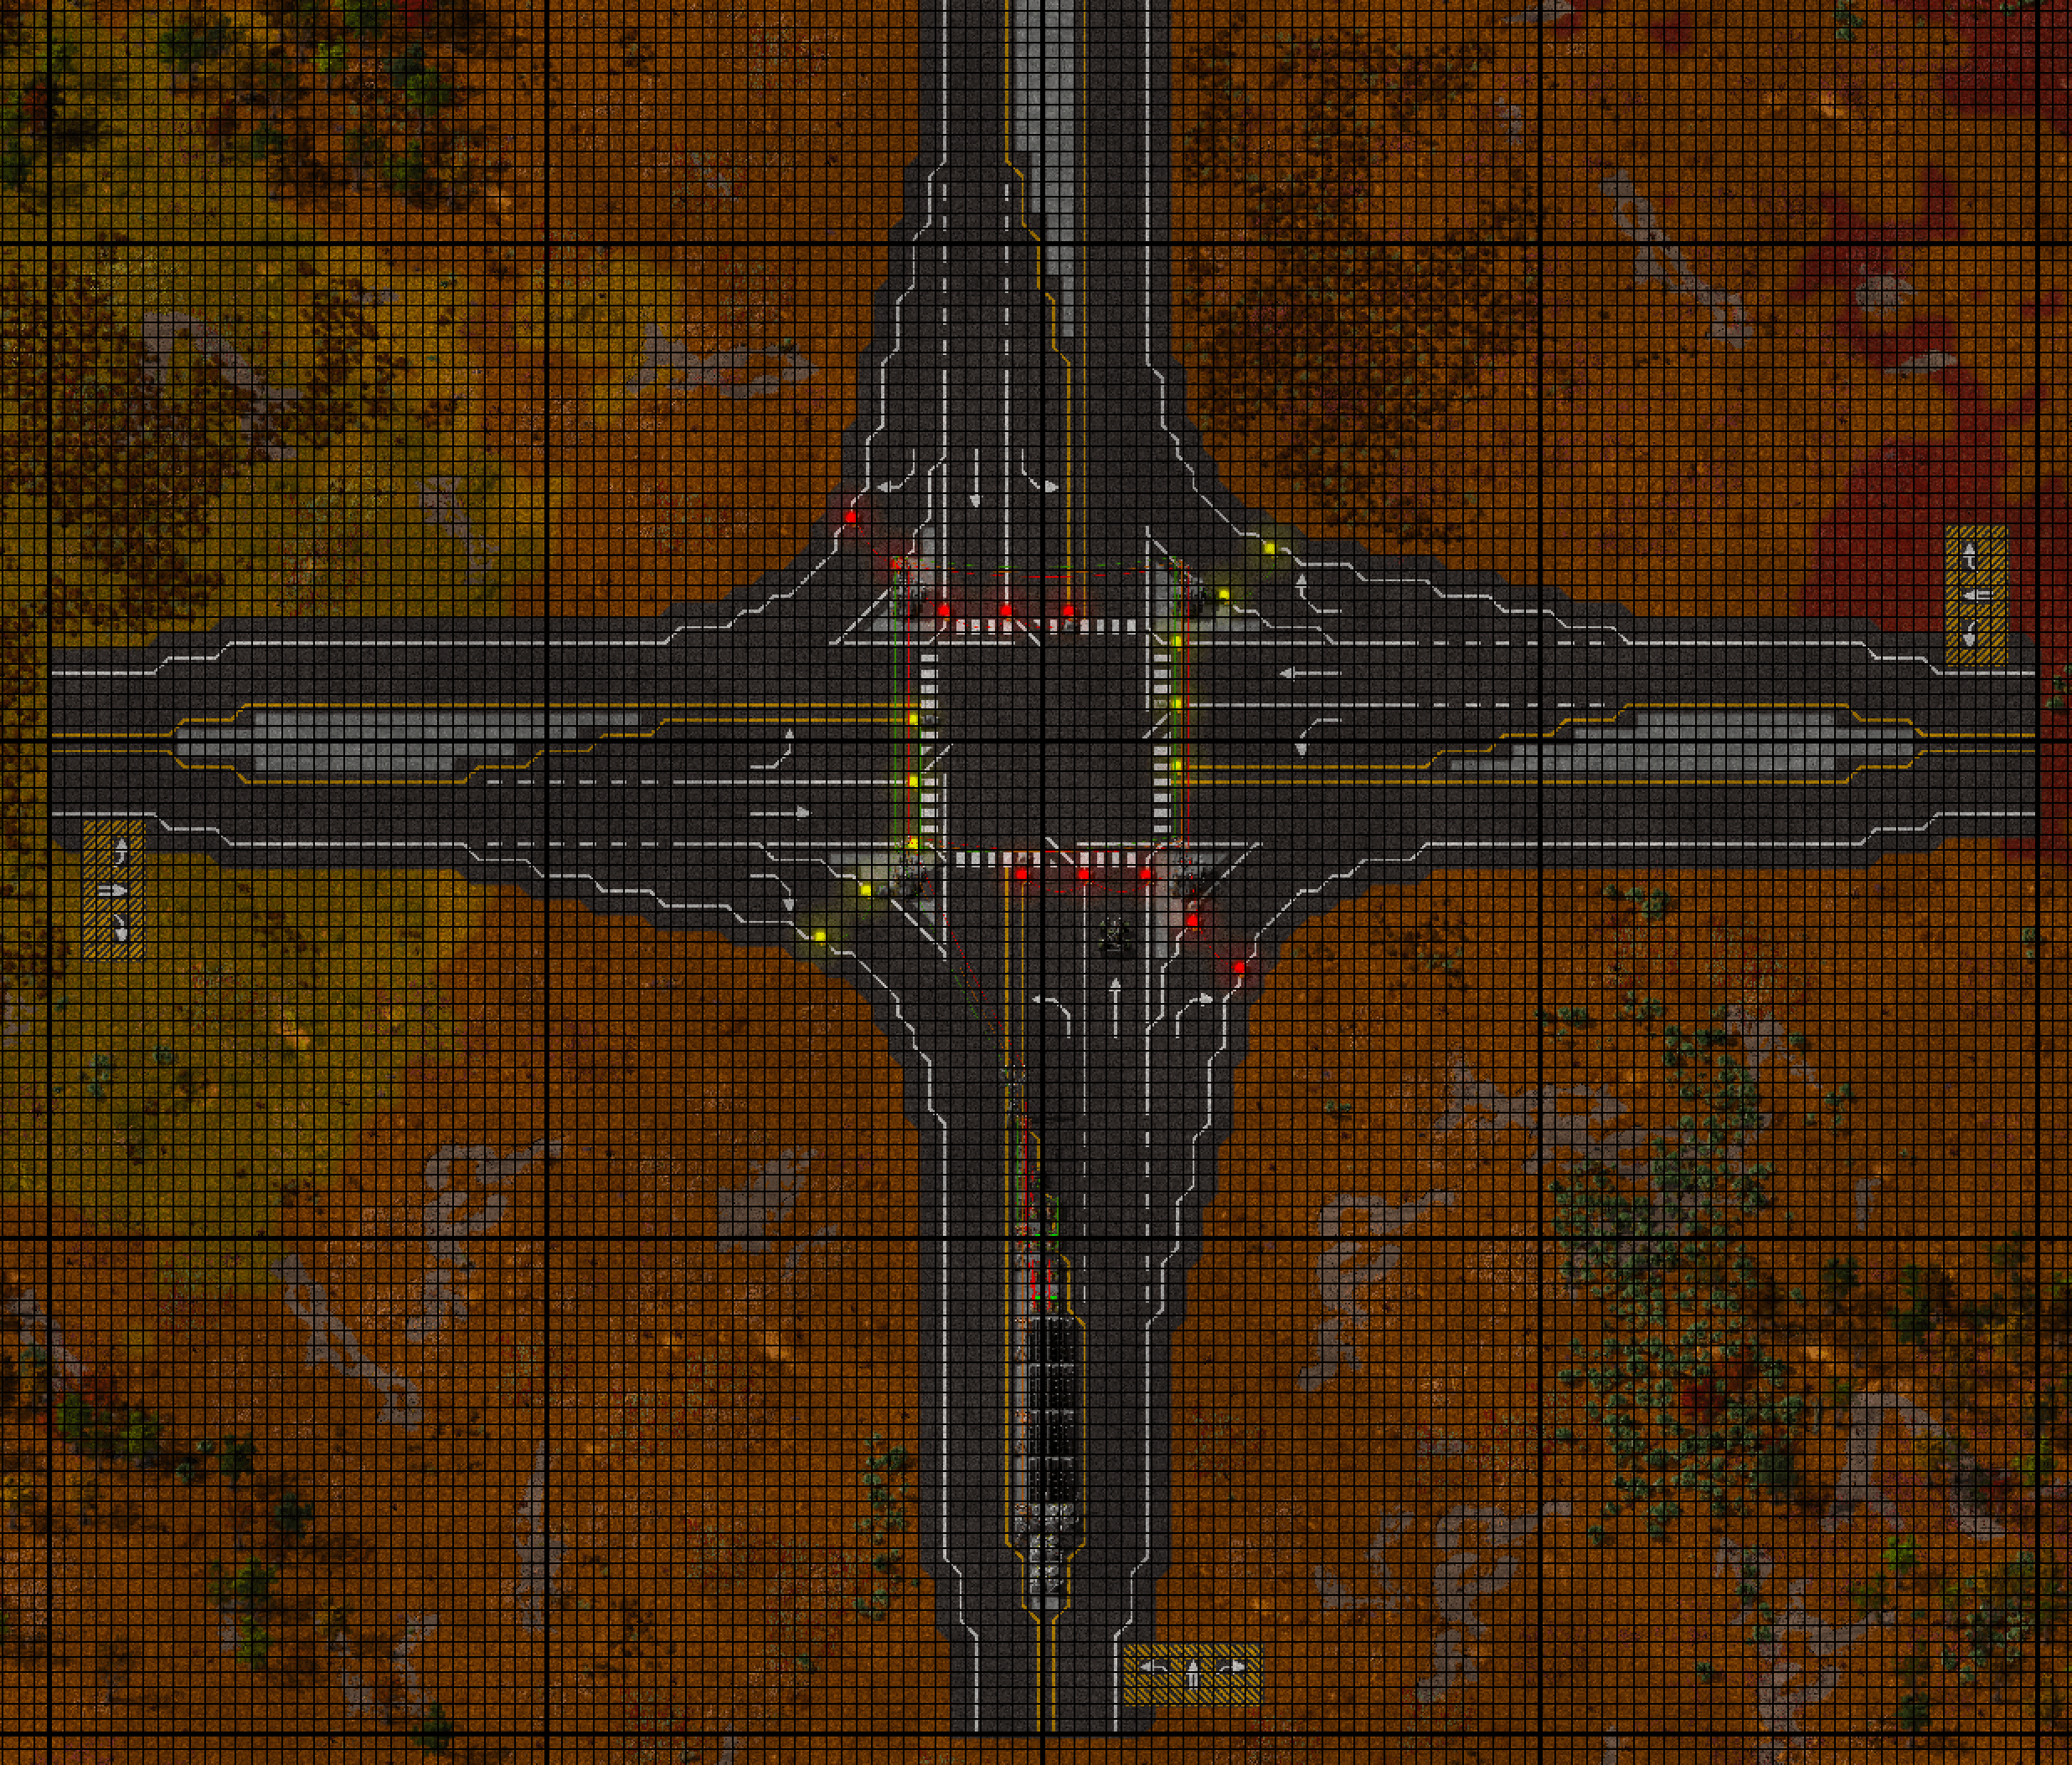 v1.1 2x2 intersection